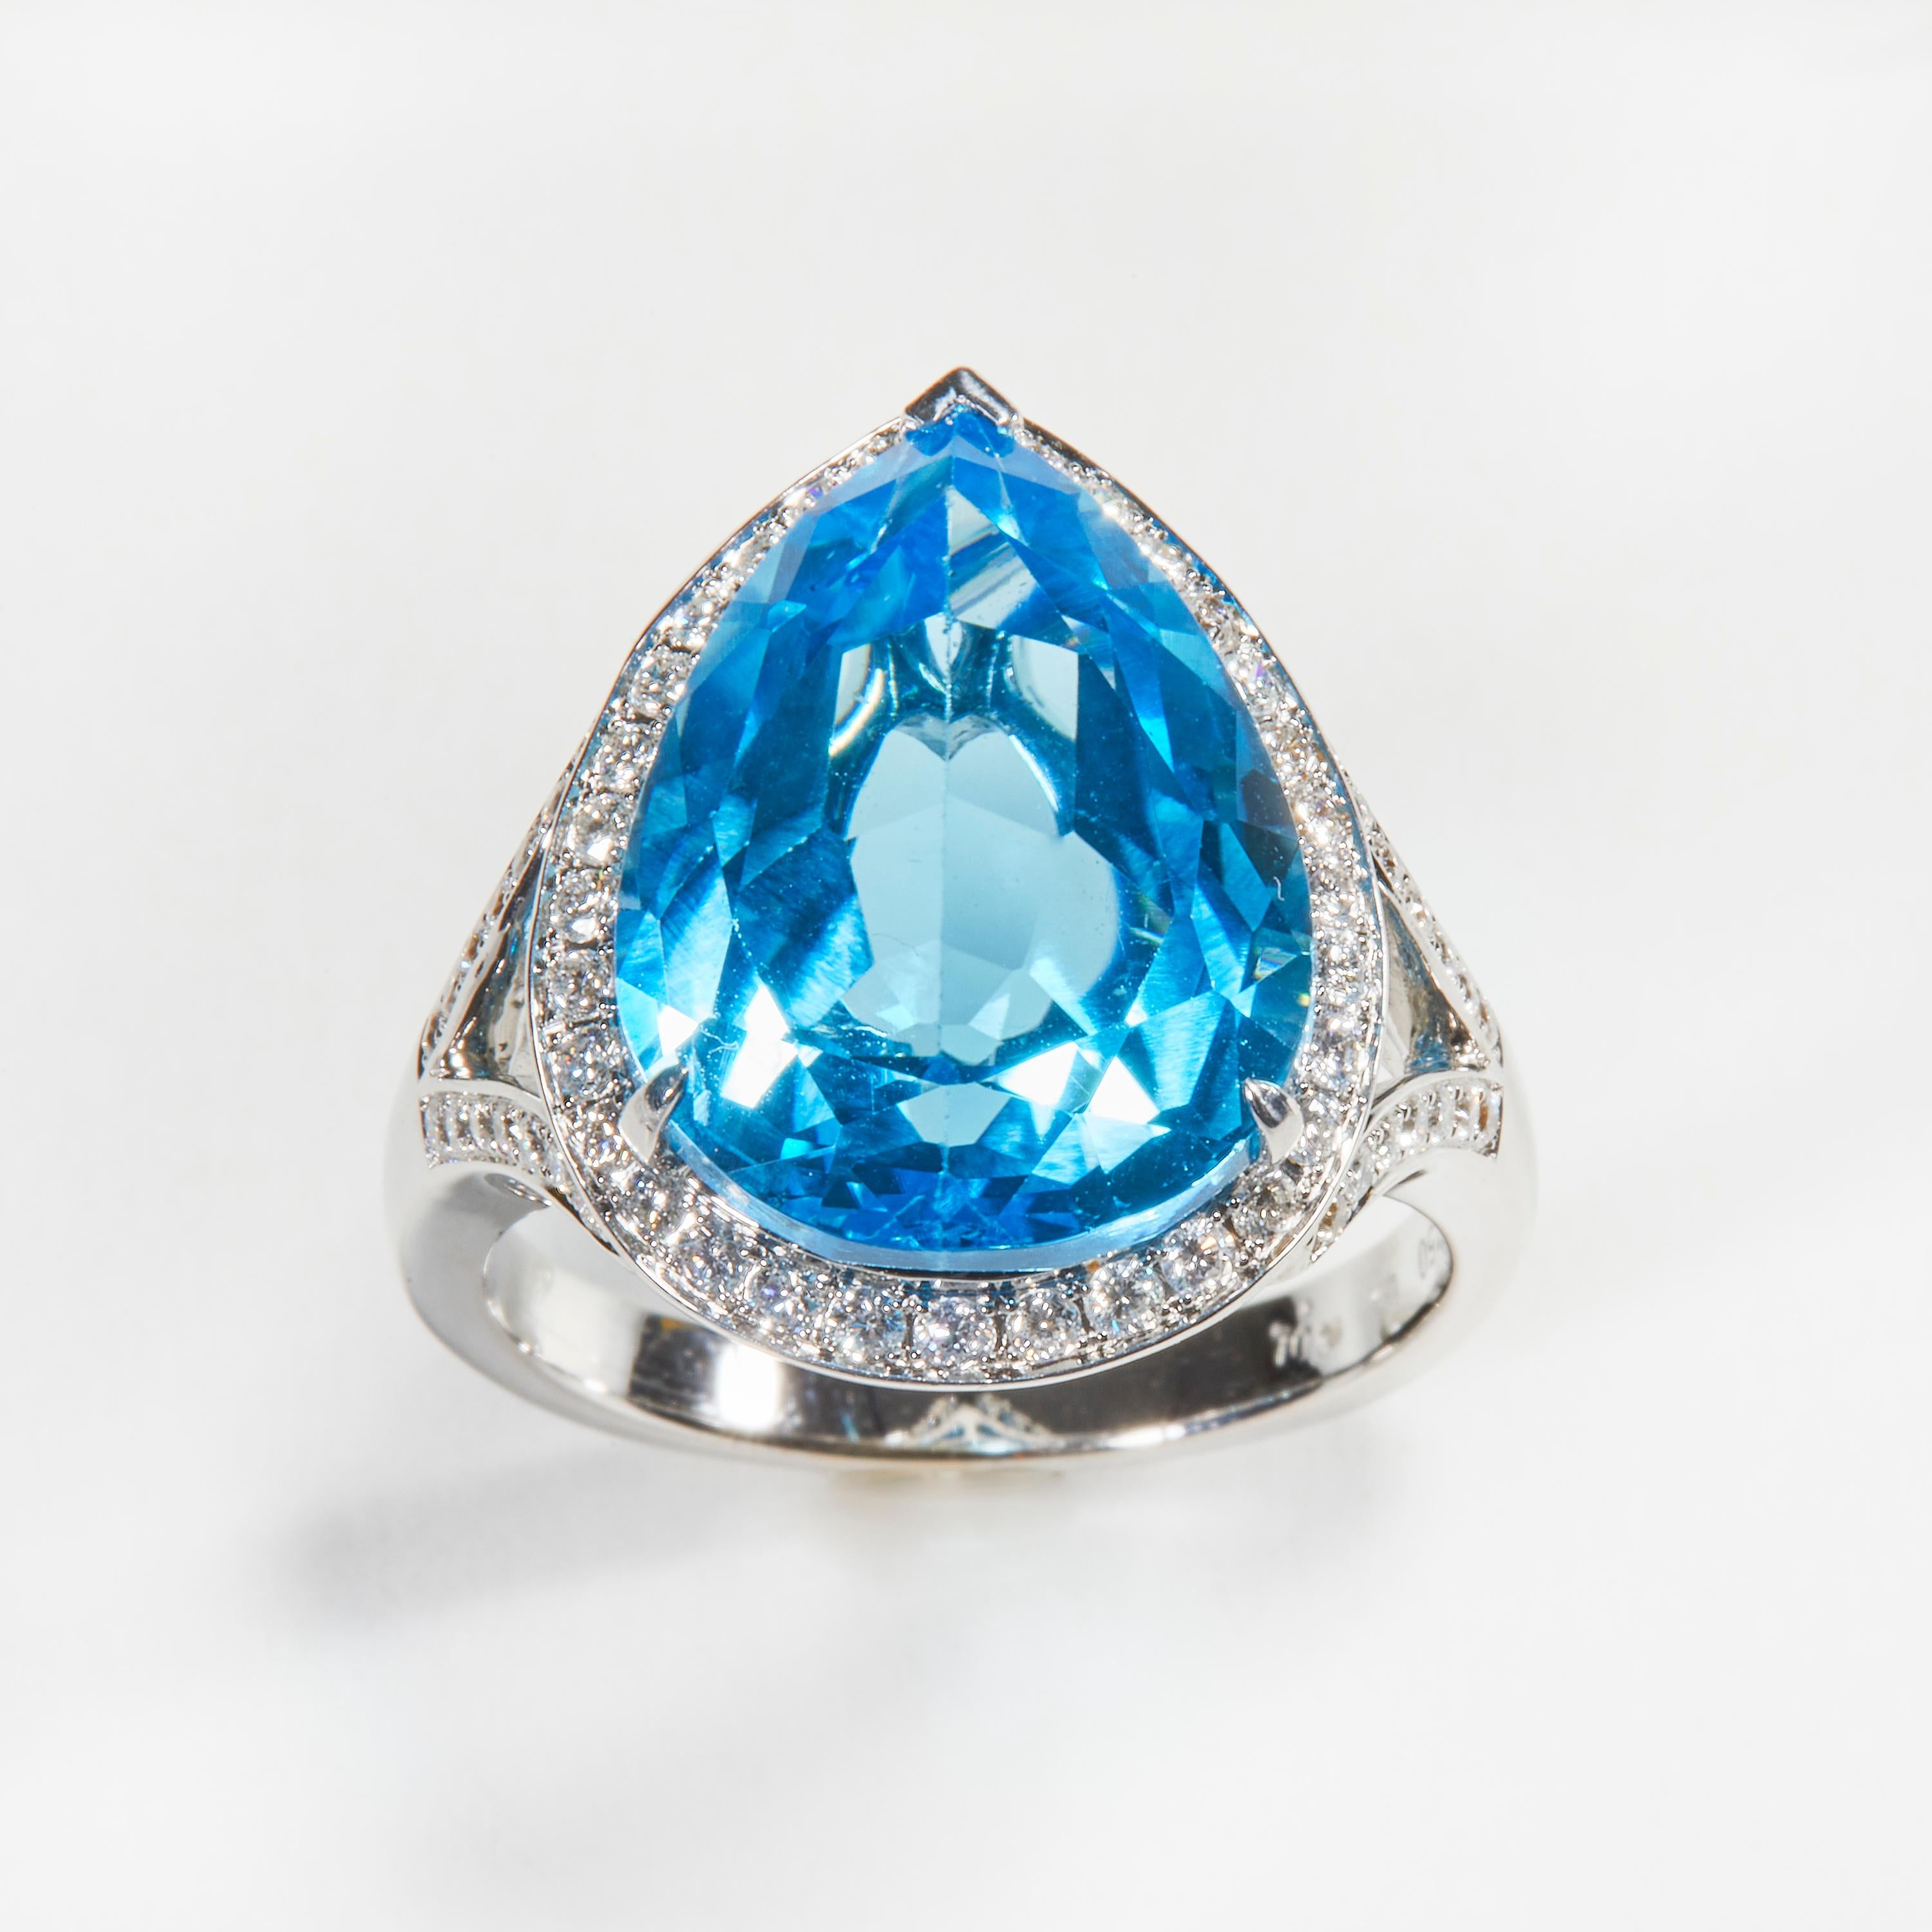 18 Karat White Gold Diamond and Topaz Cocktail Ring

60 Diamonds 0.46 Carat HSI
1 Topaz 11.81 Carat

Size EU 54 US 7


Founded in 1974, Gianni Lazzaro is a family-owned jewelry company based out of Düsseldorf, Germany.
Although rooted in Germany,